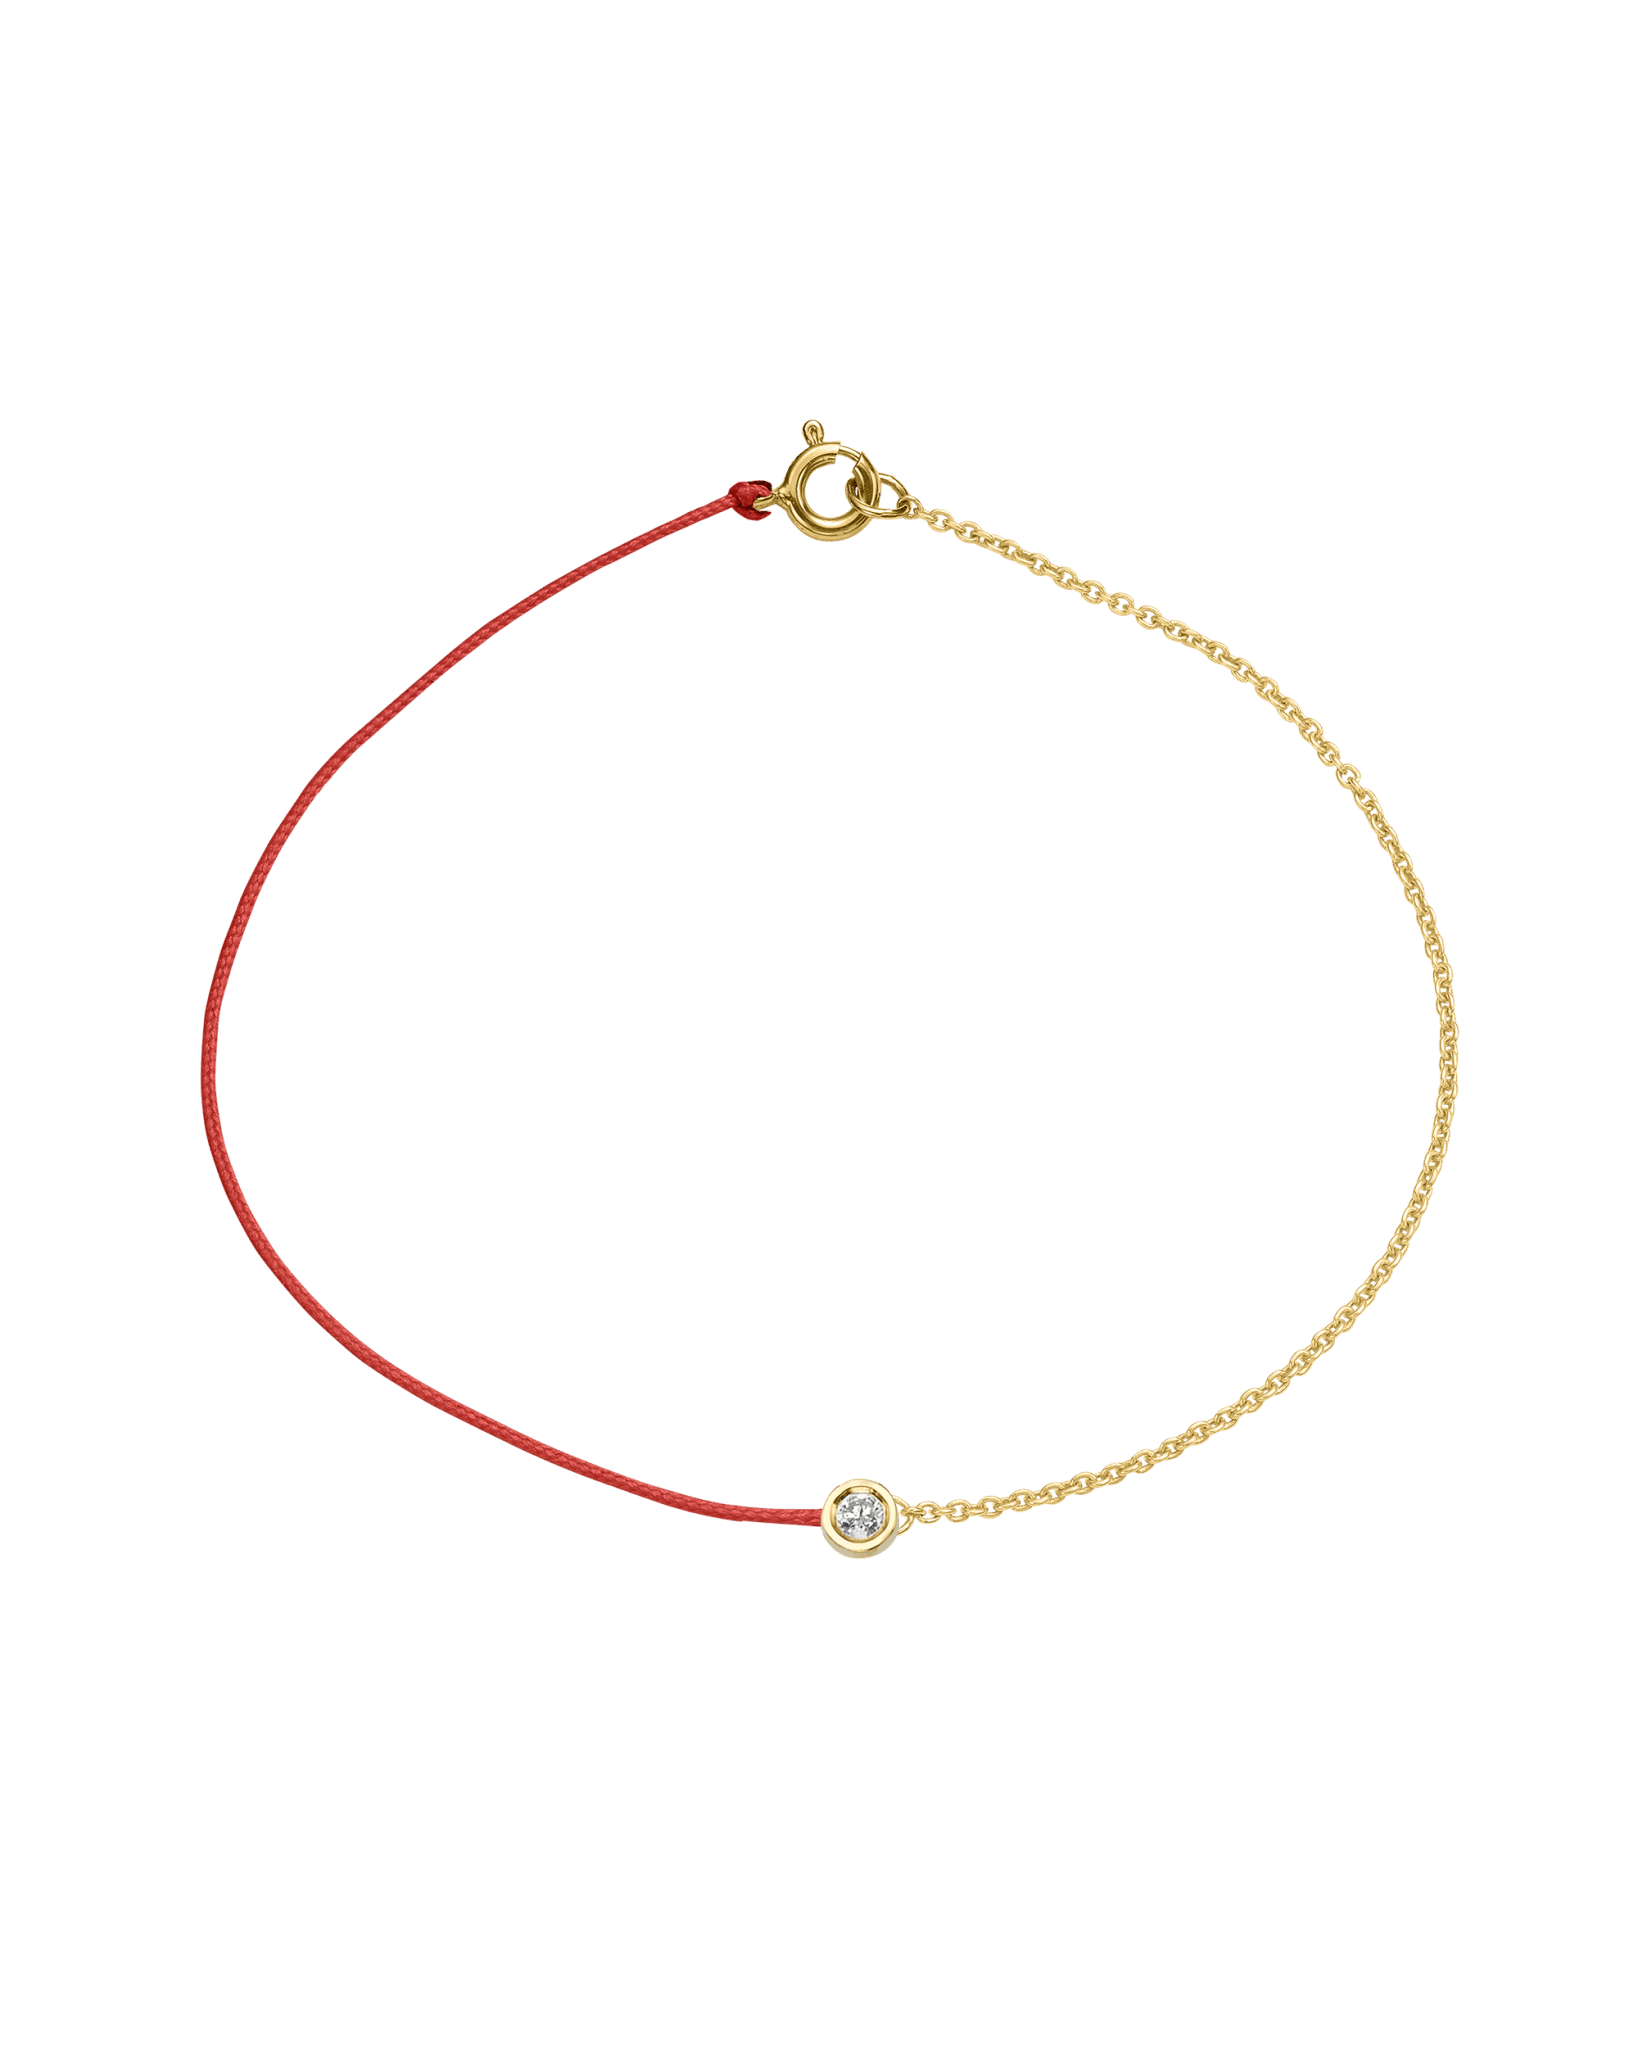 The Half Chain String of Love - 14K Yellow Gold Bracelet 14K Solid Gold Red Medium: 0.04ct Small 6 Inches